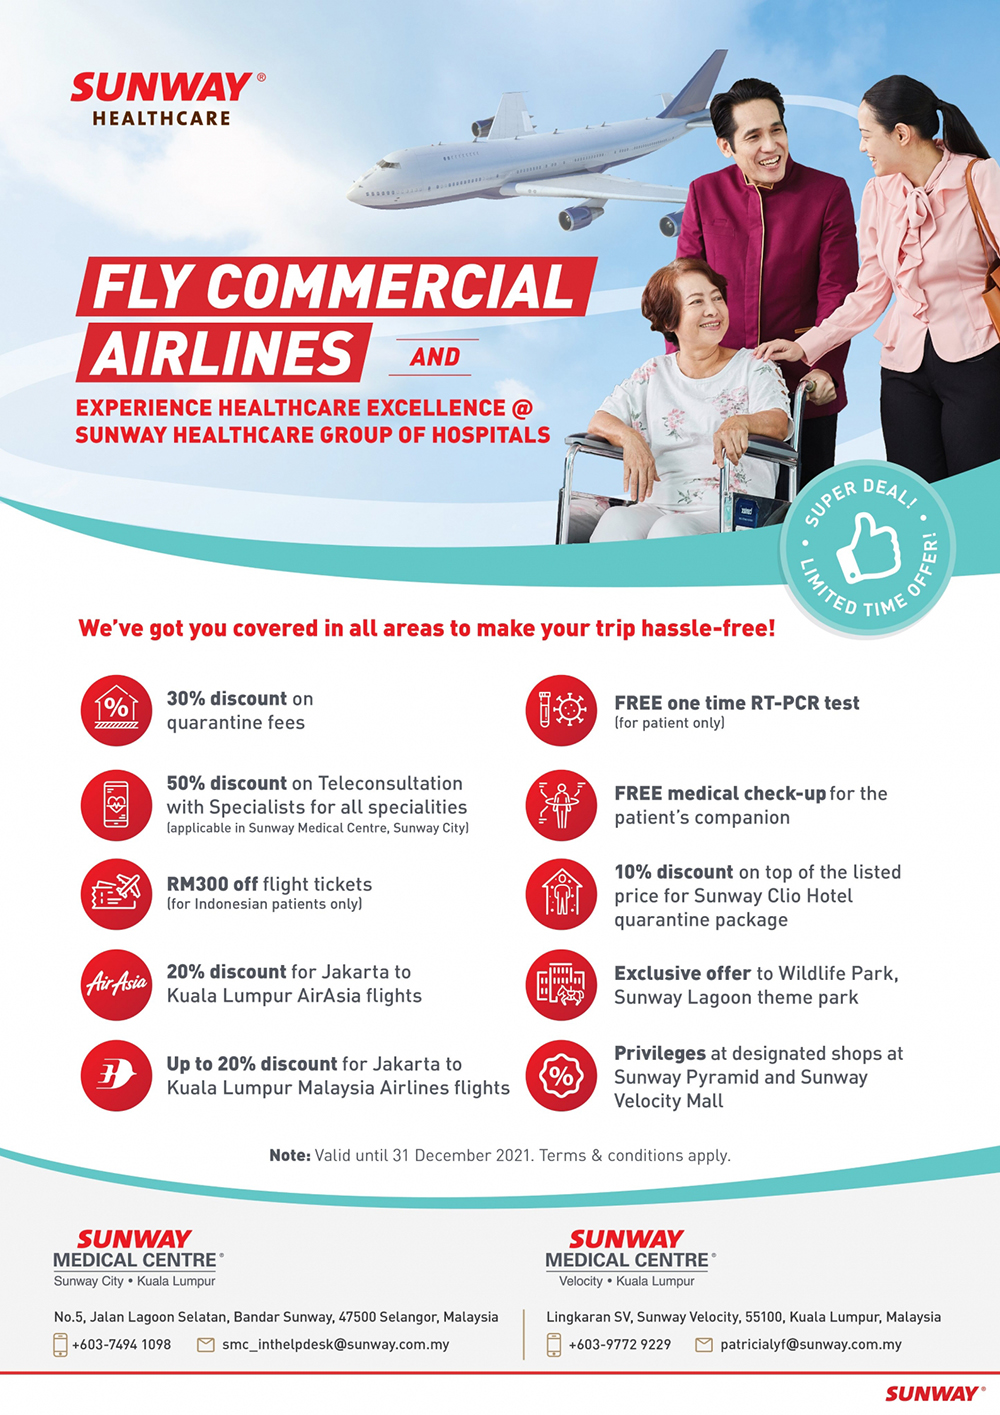 Commercial Airlines Offerings With Sunway Healthcare Group of Hospitals